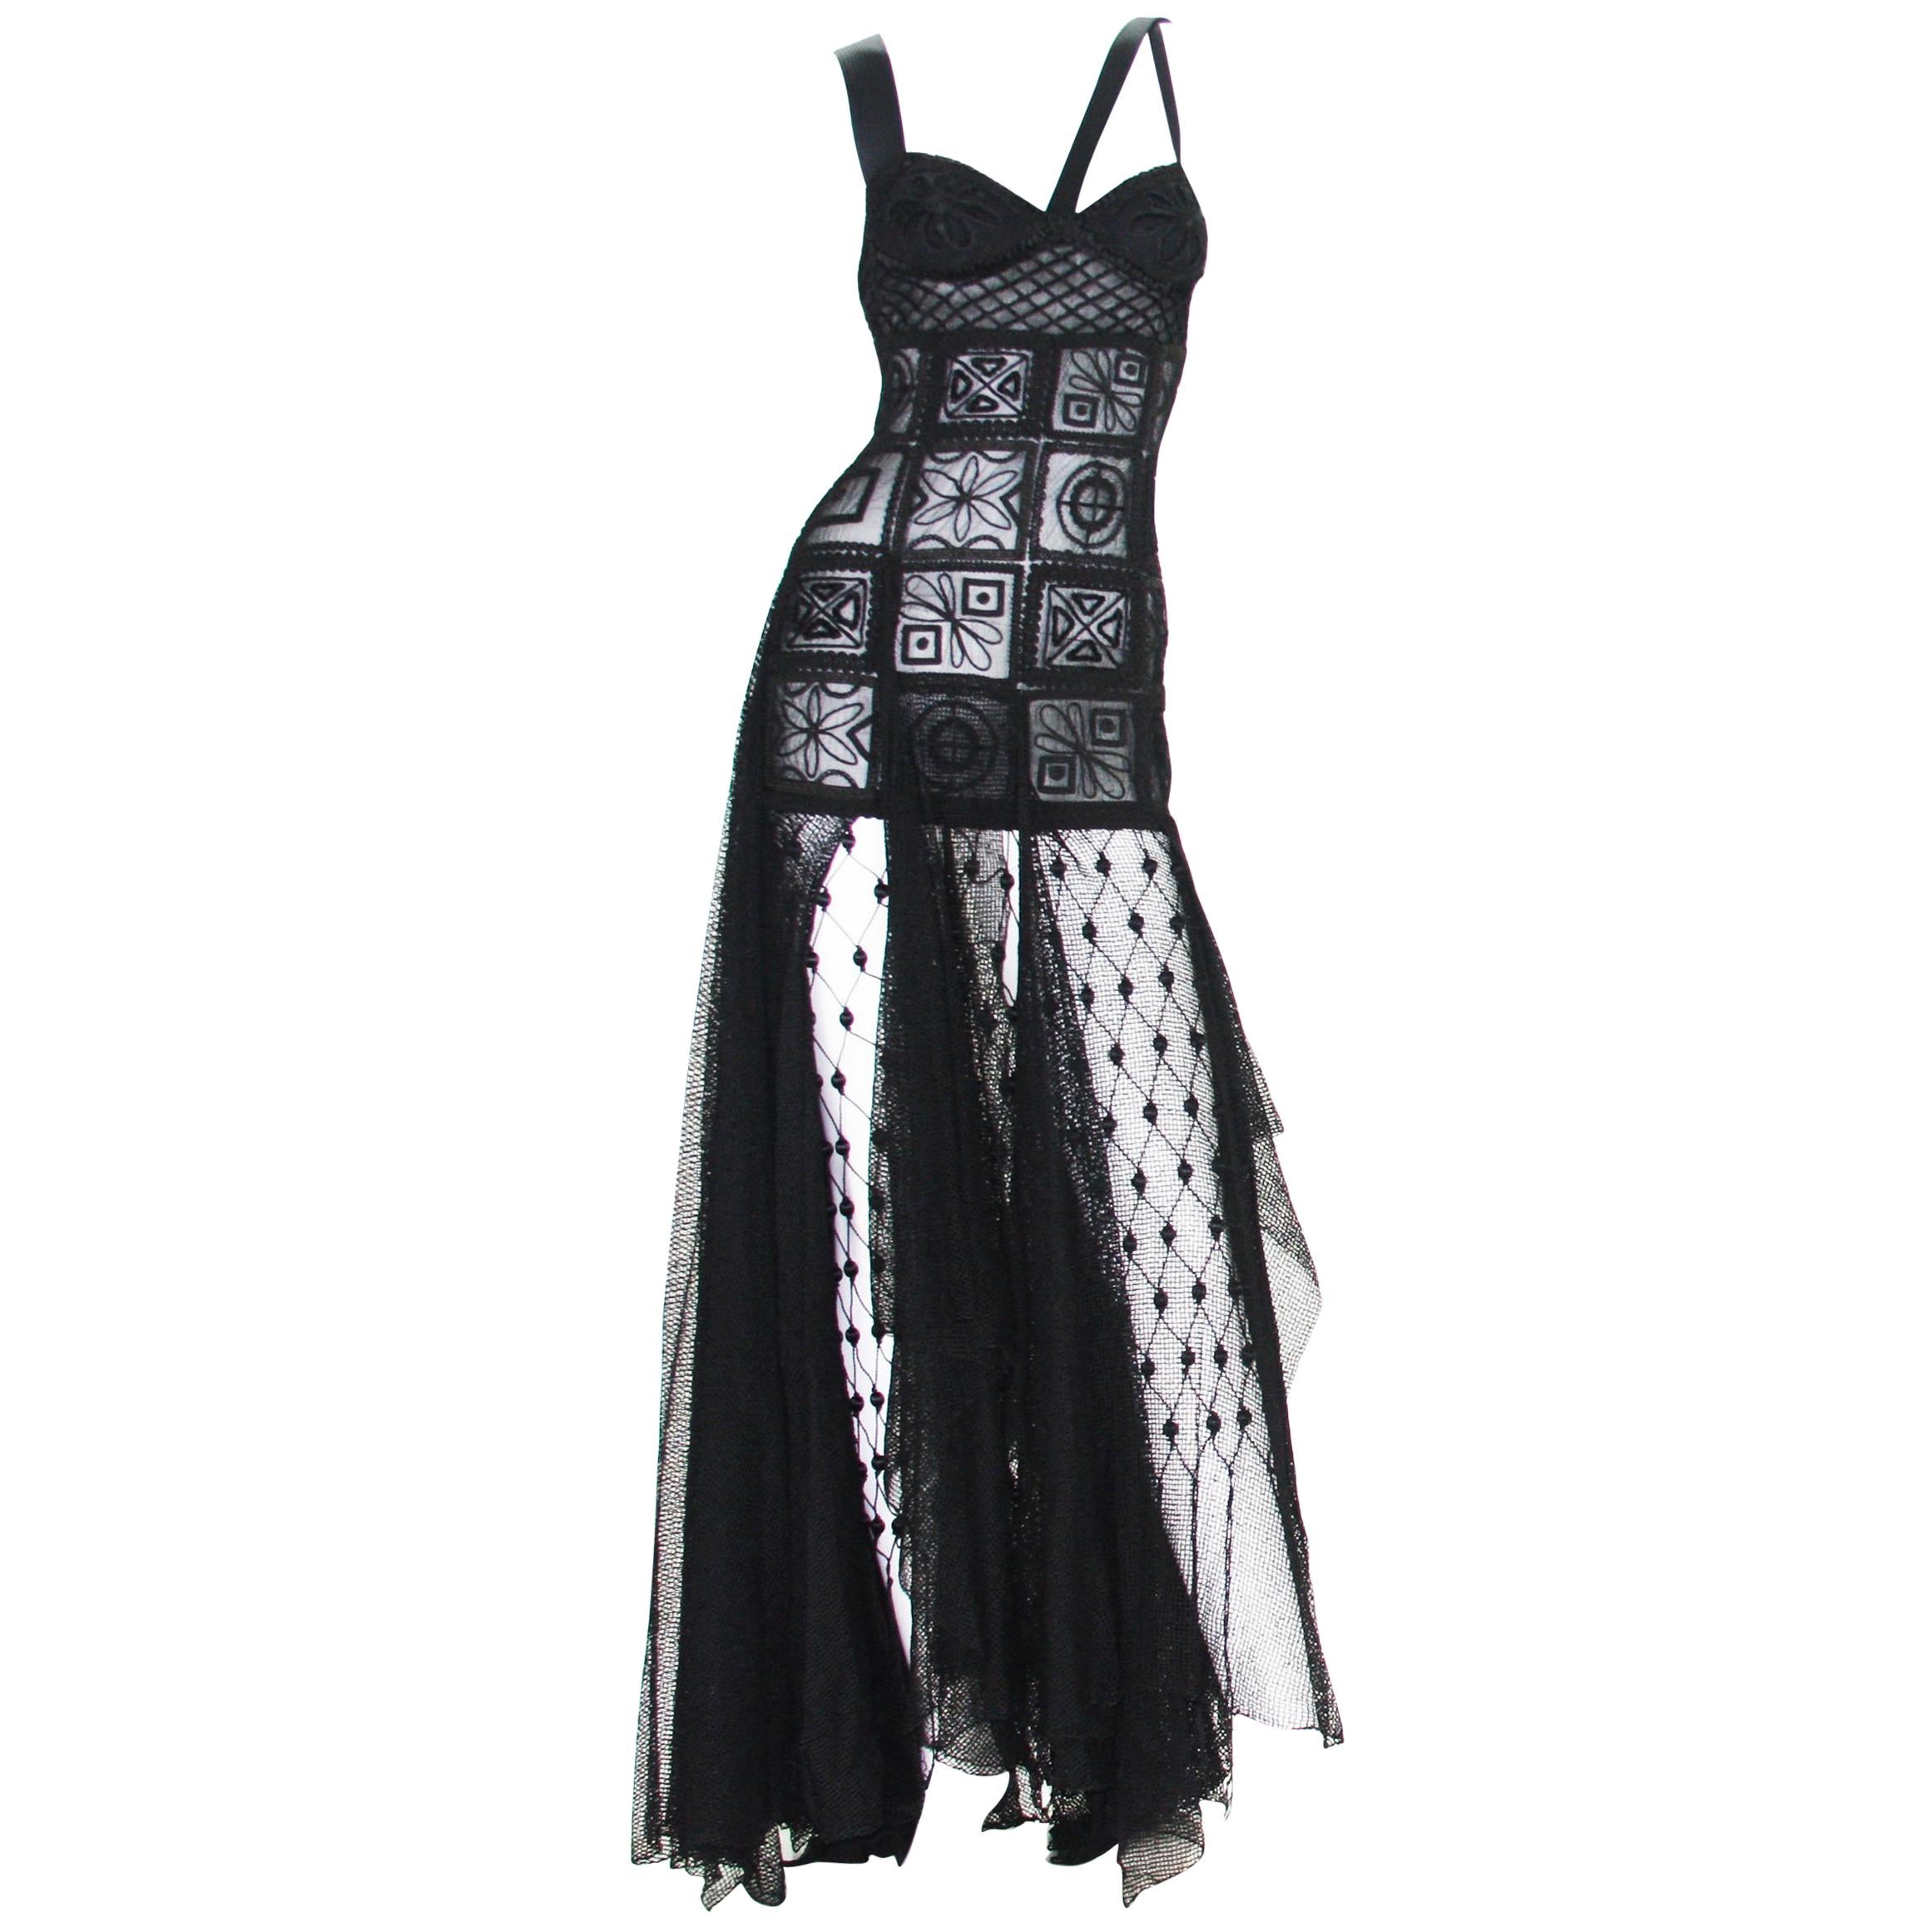 New Atelier Versace F/W 1993 Sheer Black Net Embroidered Dress Gown